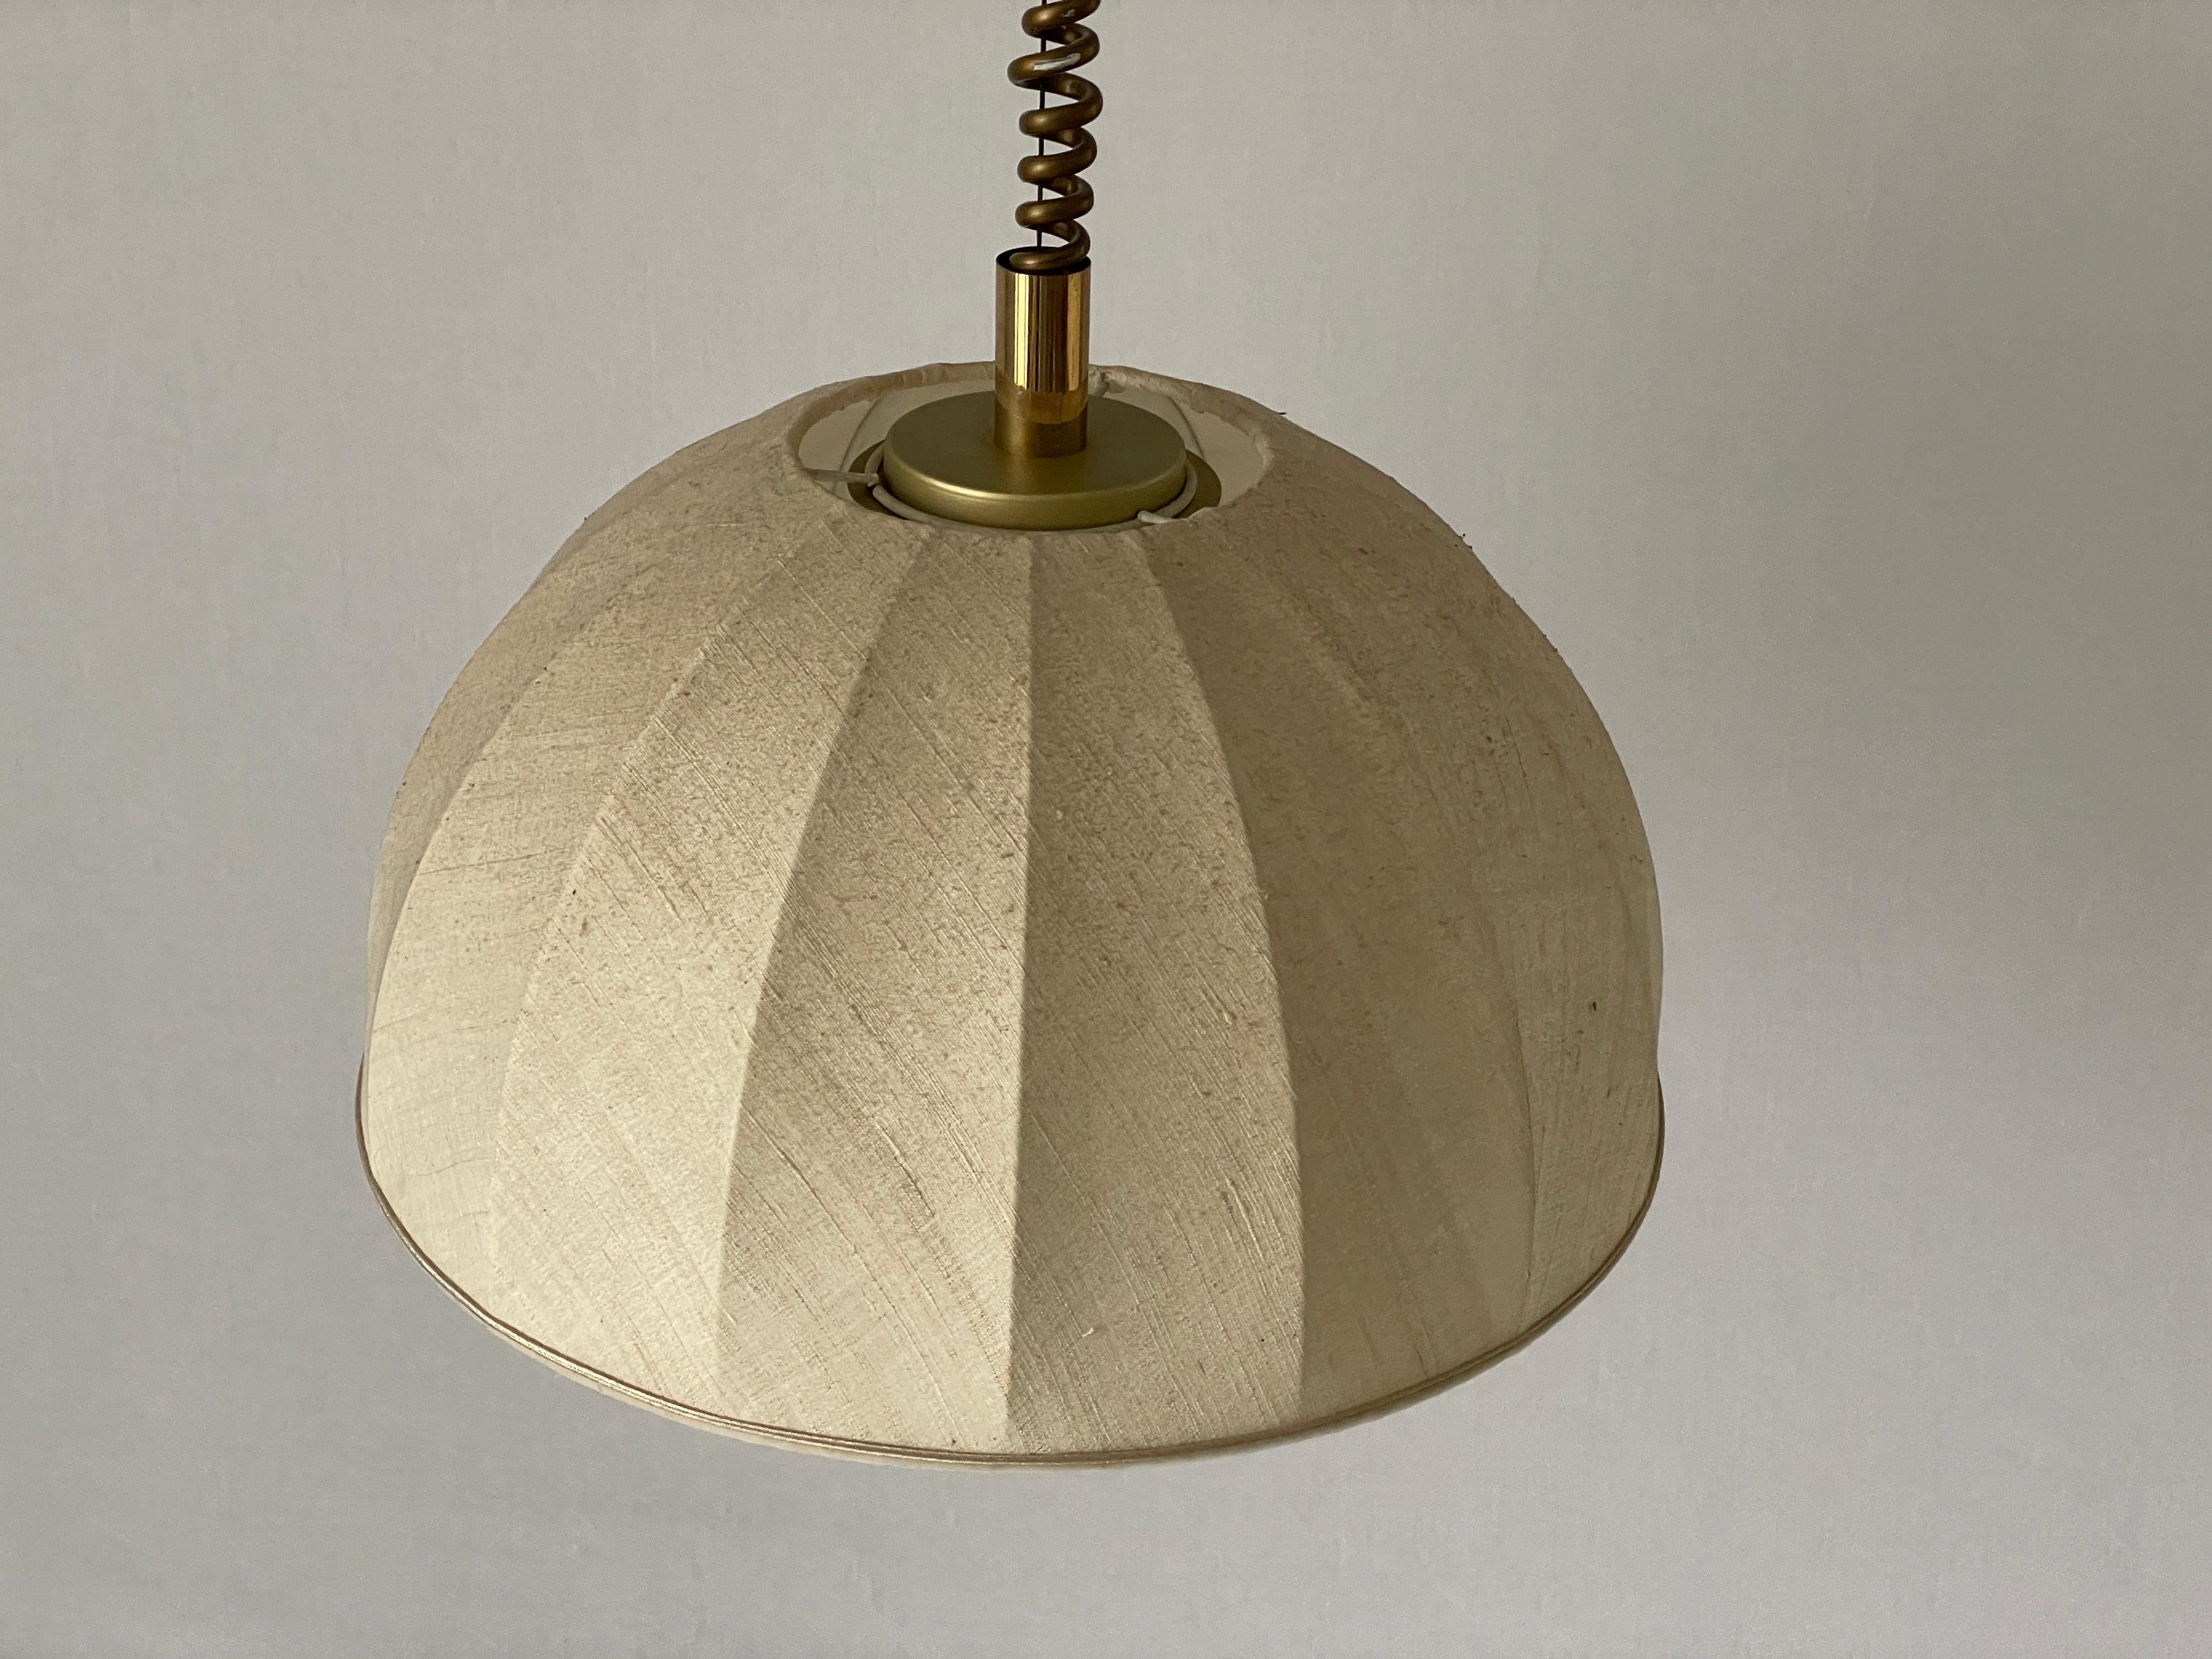 Fabric and Brass 3 socket Adjustable Shade Pendant Lamp by WKR, 1970s, Germany For Sale 1